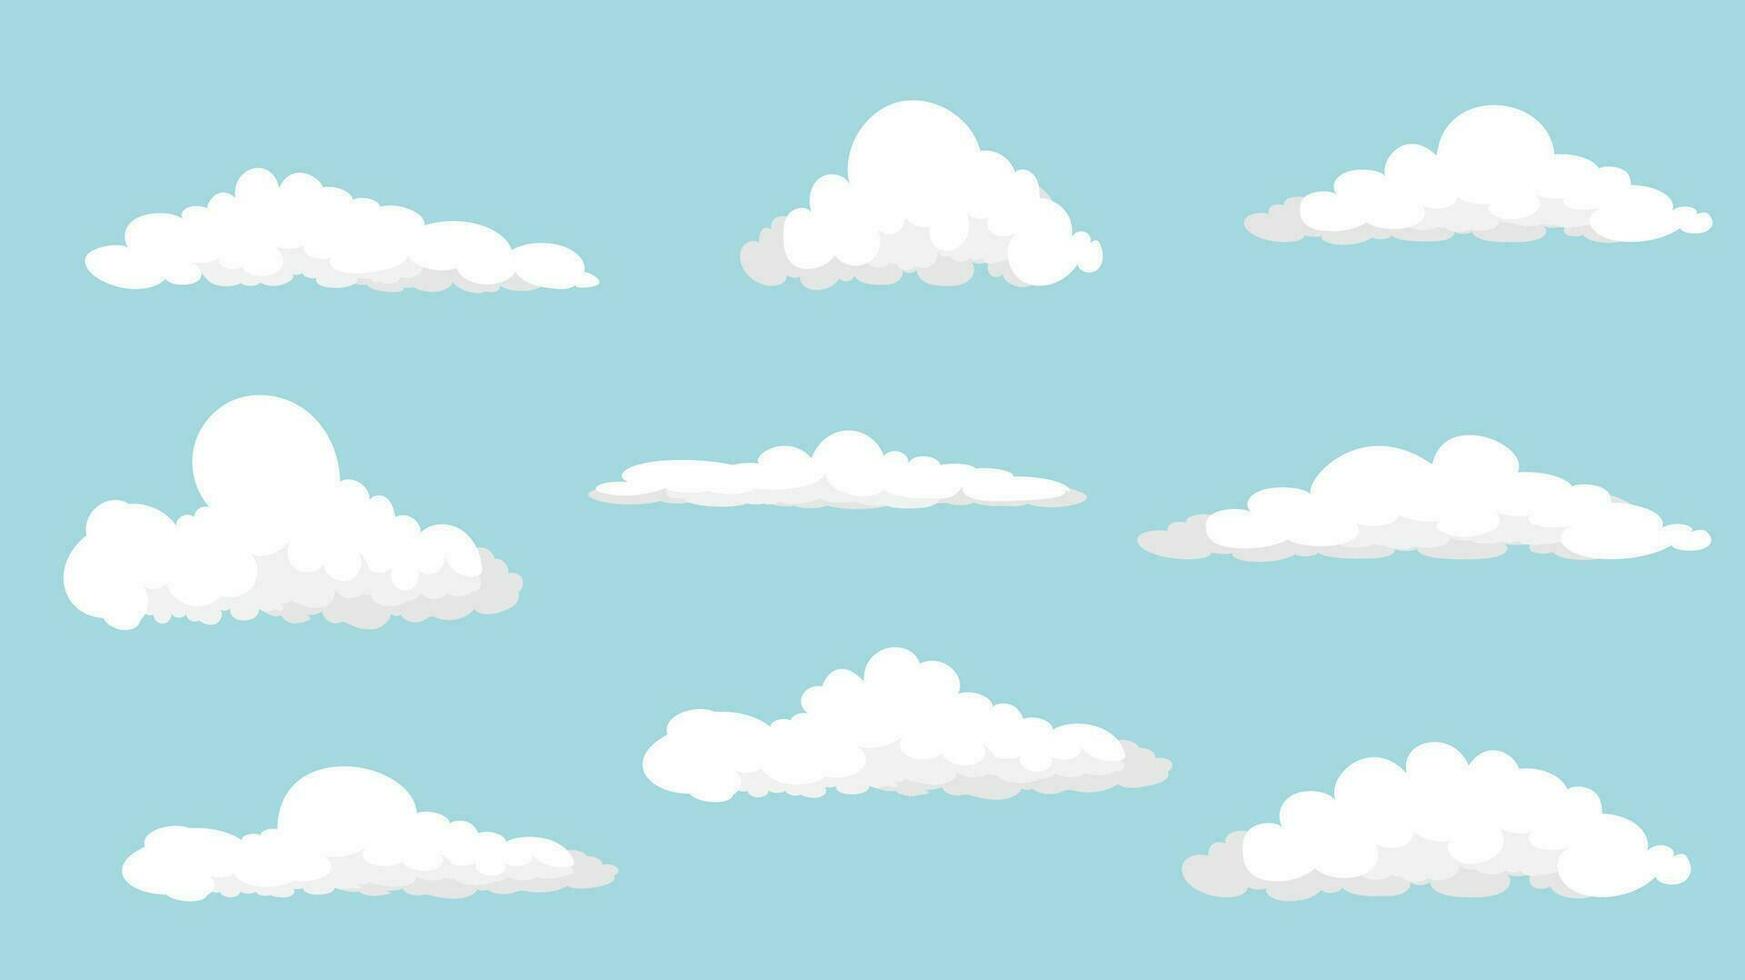 Cloud set, set of white cartoon clouds, white clouds collection flat style easy to edit, vector illustration.